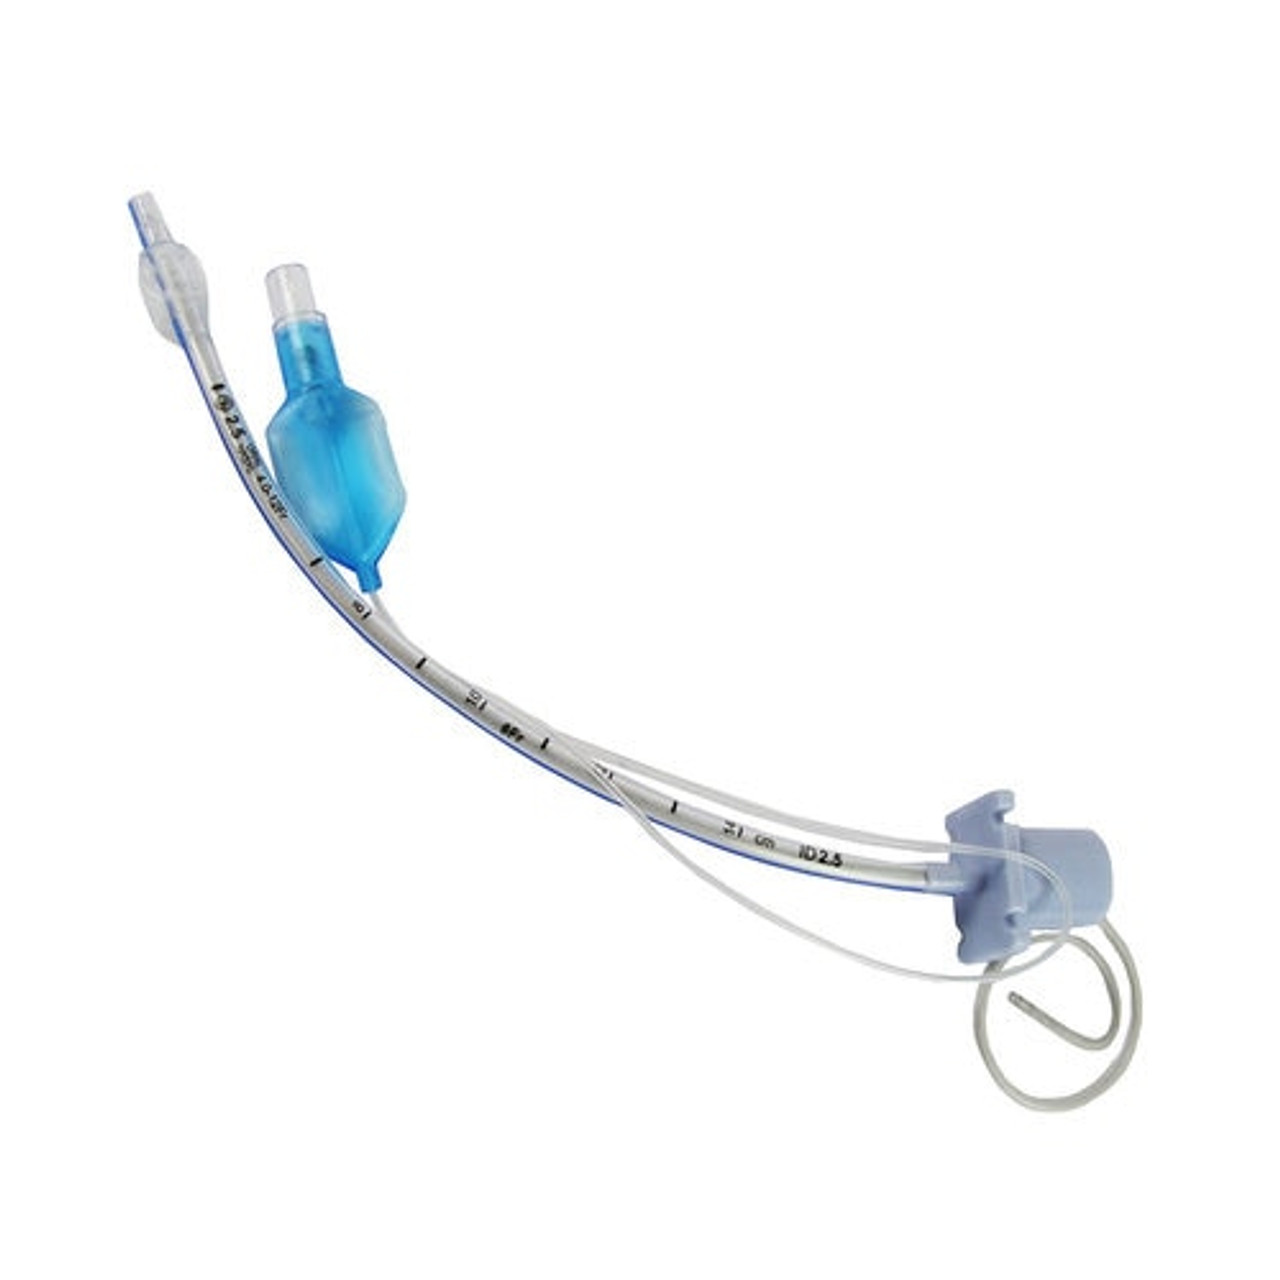 Curaplex® Intraosseous Infusion Kits